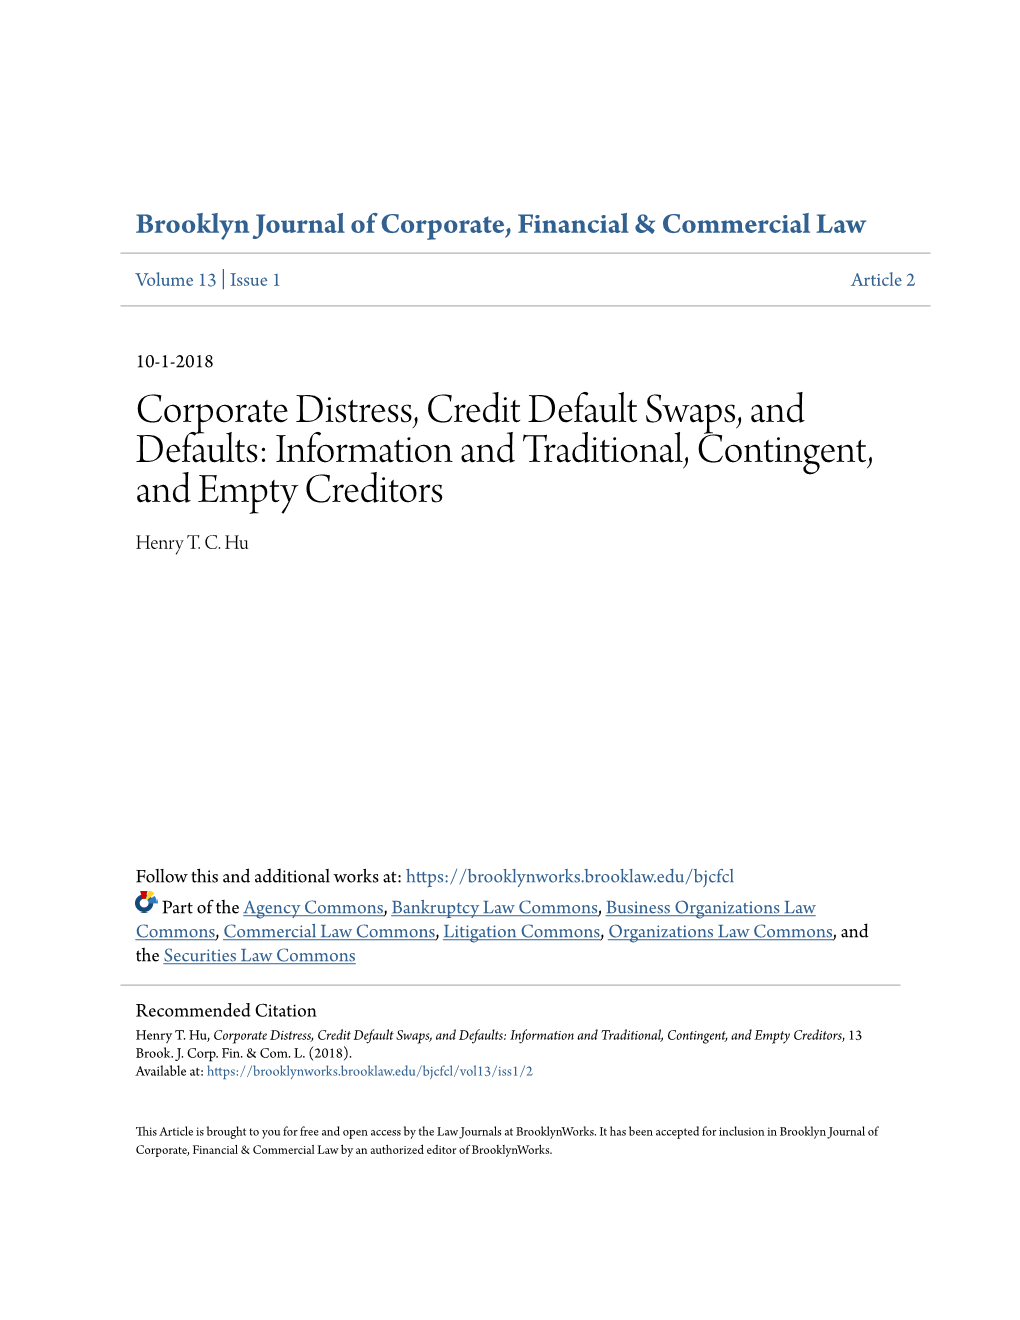 Corporate Distress, Credit Default Swaps, and Defaults: Information and Traditional, Contingent, and Empty Creditors Henry T